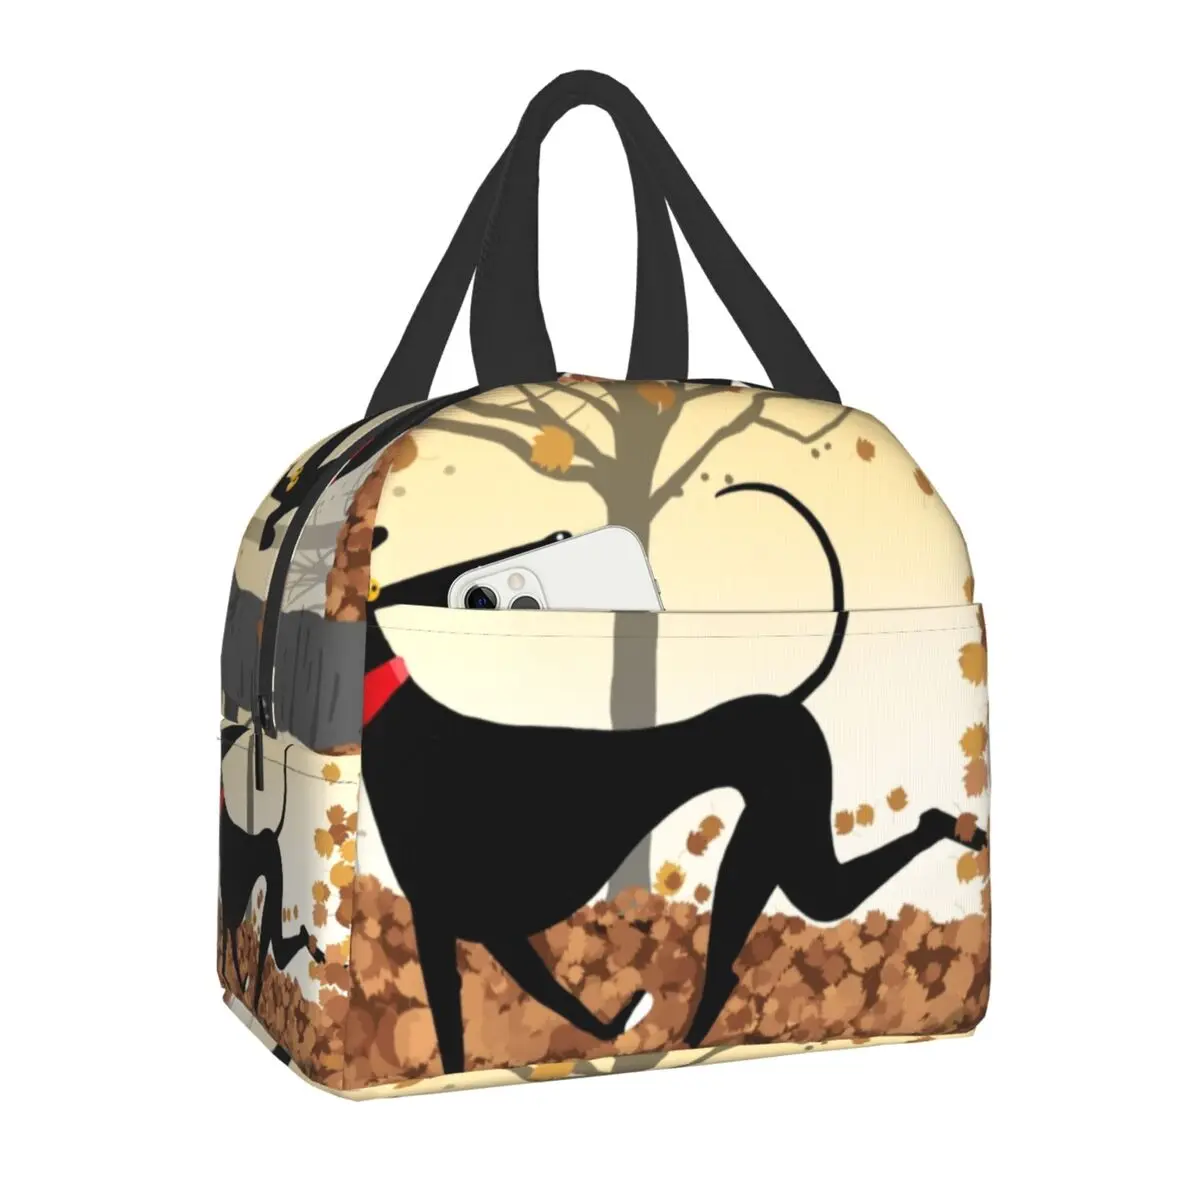 

Autumn Hound Insulated Lunch Bag for Women Resuable Greyhound Whippet Dog Thermal Cooler Bento Box Office Work School